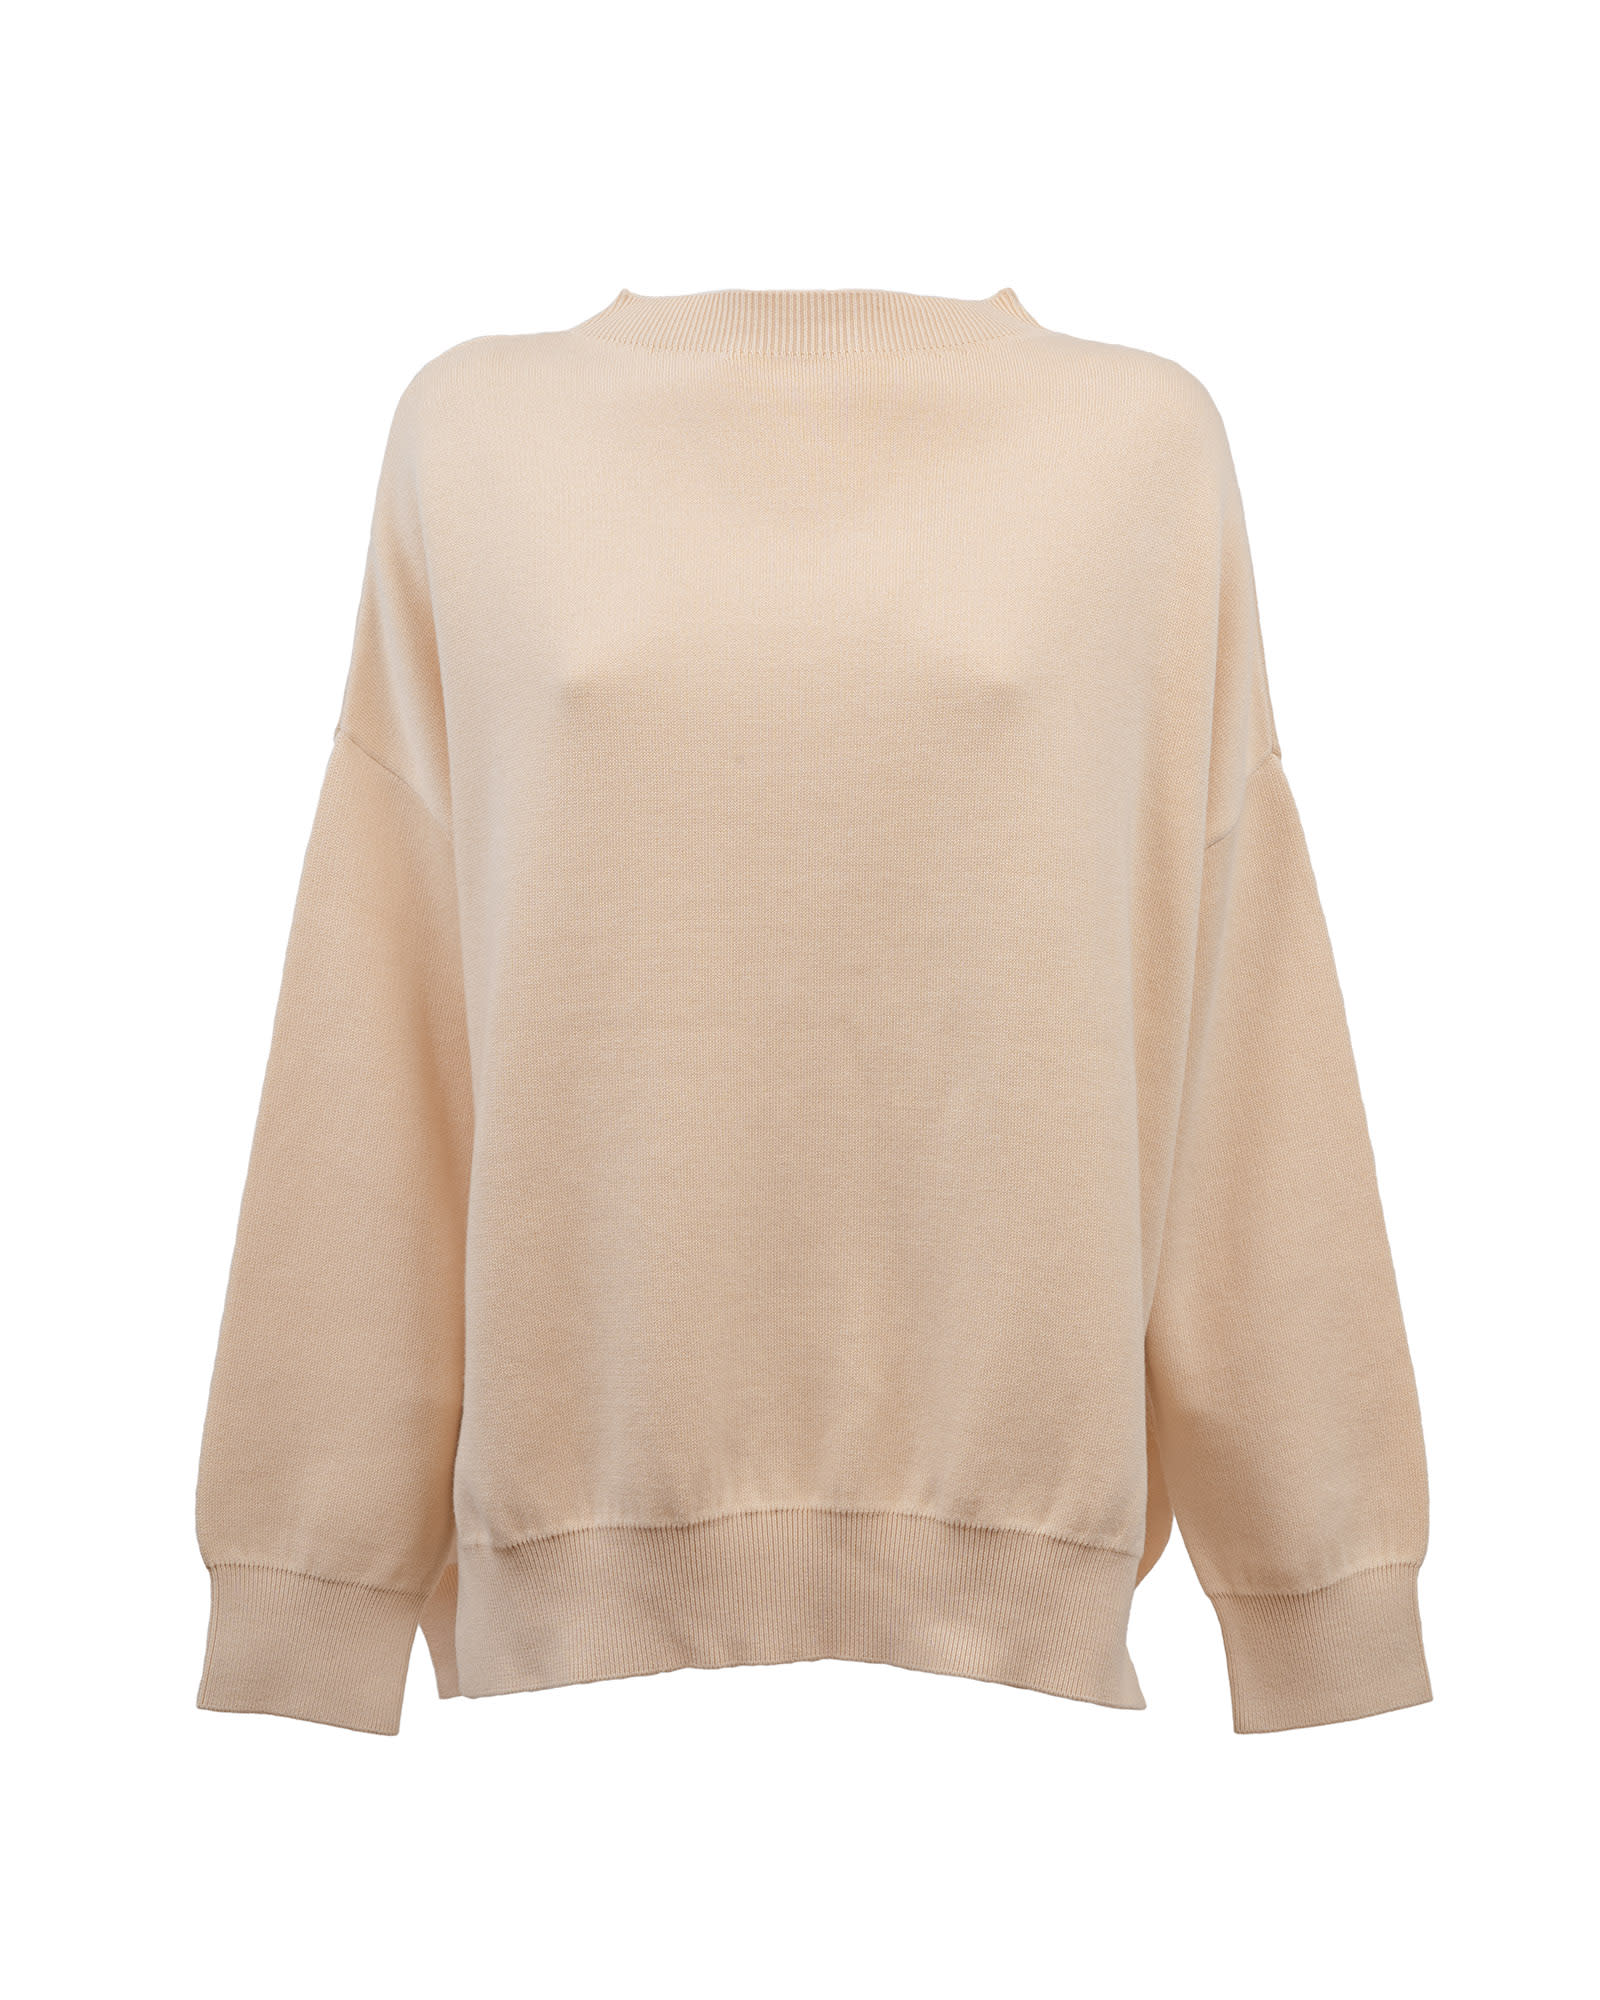 Closed Organic cotton sweatshirt on the outside and soft wool blend on the inside